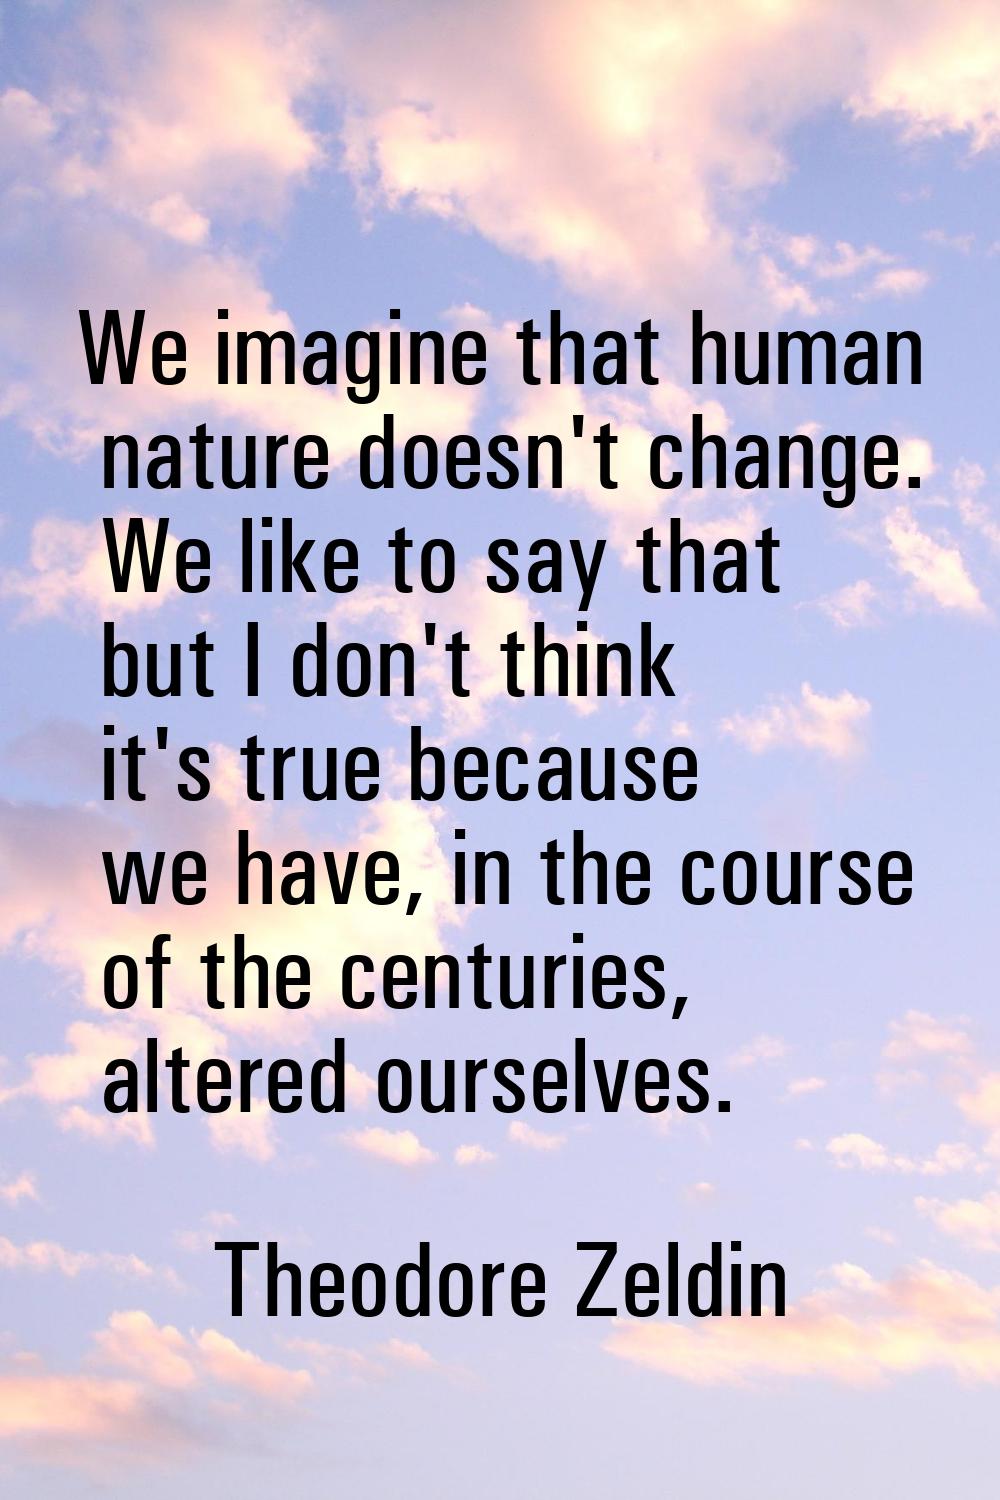 We imagine that human nature doesn't change. We like to say that but I don't think it's true becaus